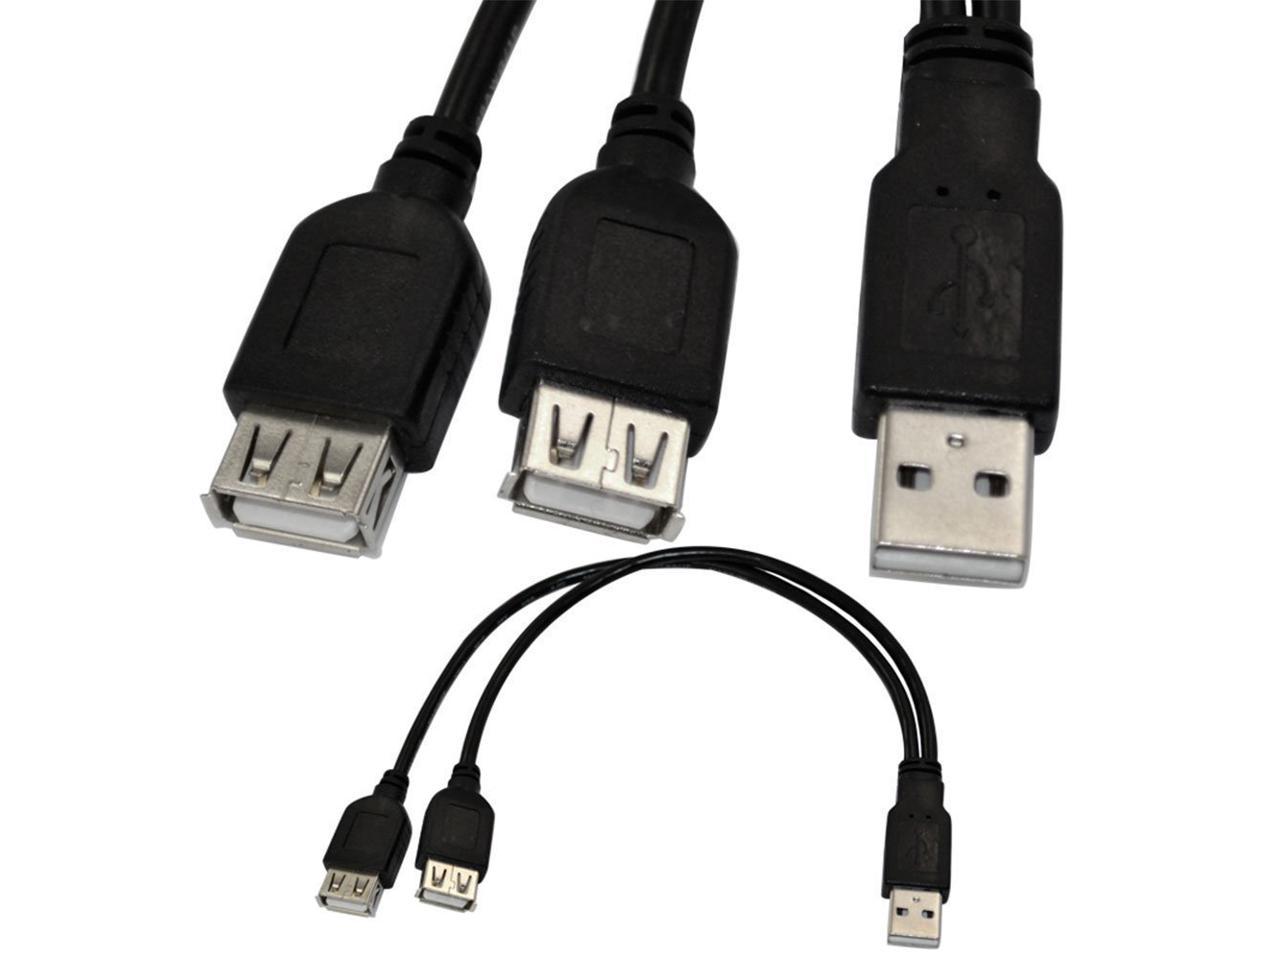 USB 2.0 Male to 2 Dual USB Female Jack Y Splitter Hub Adapter Cable